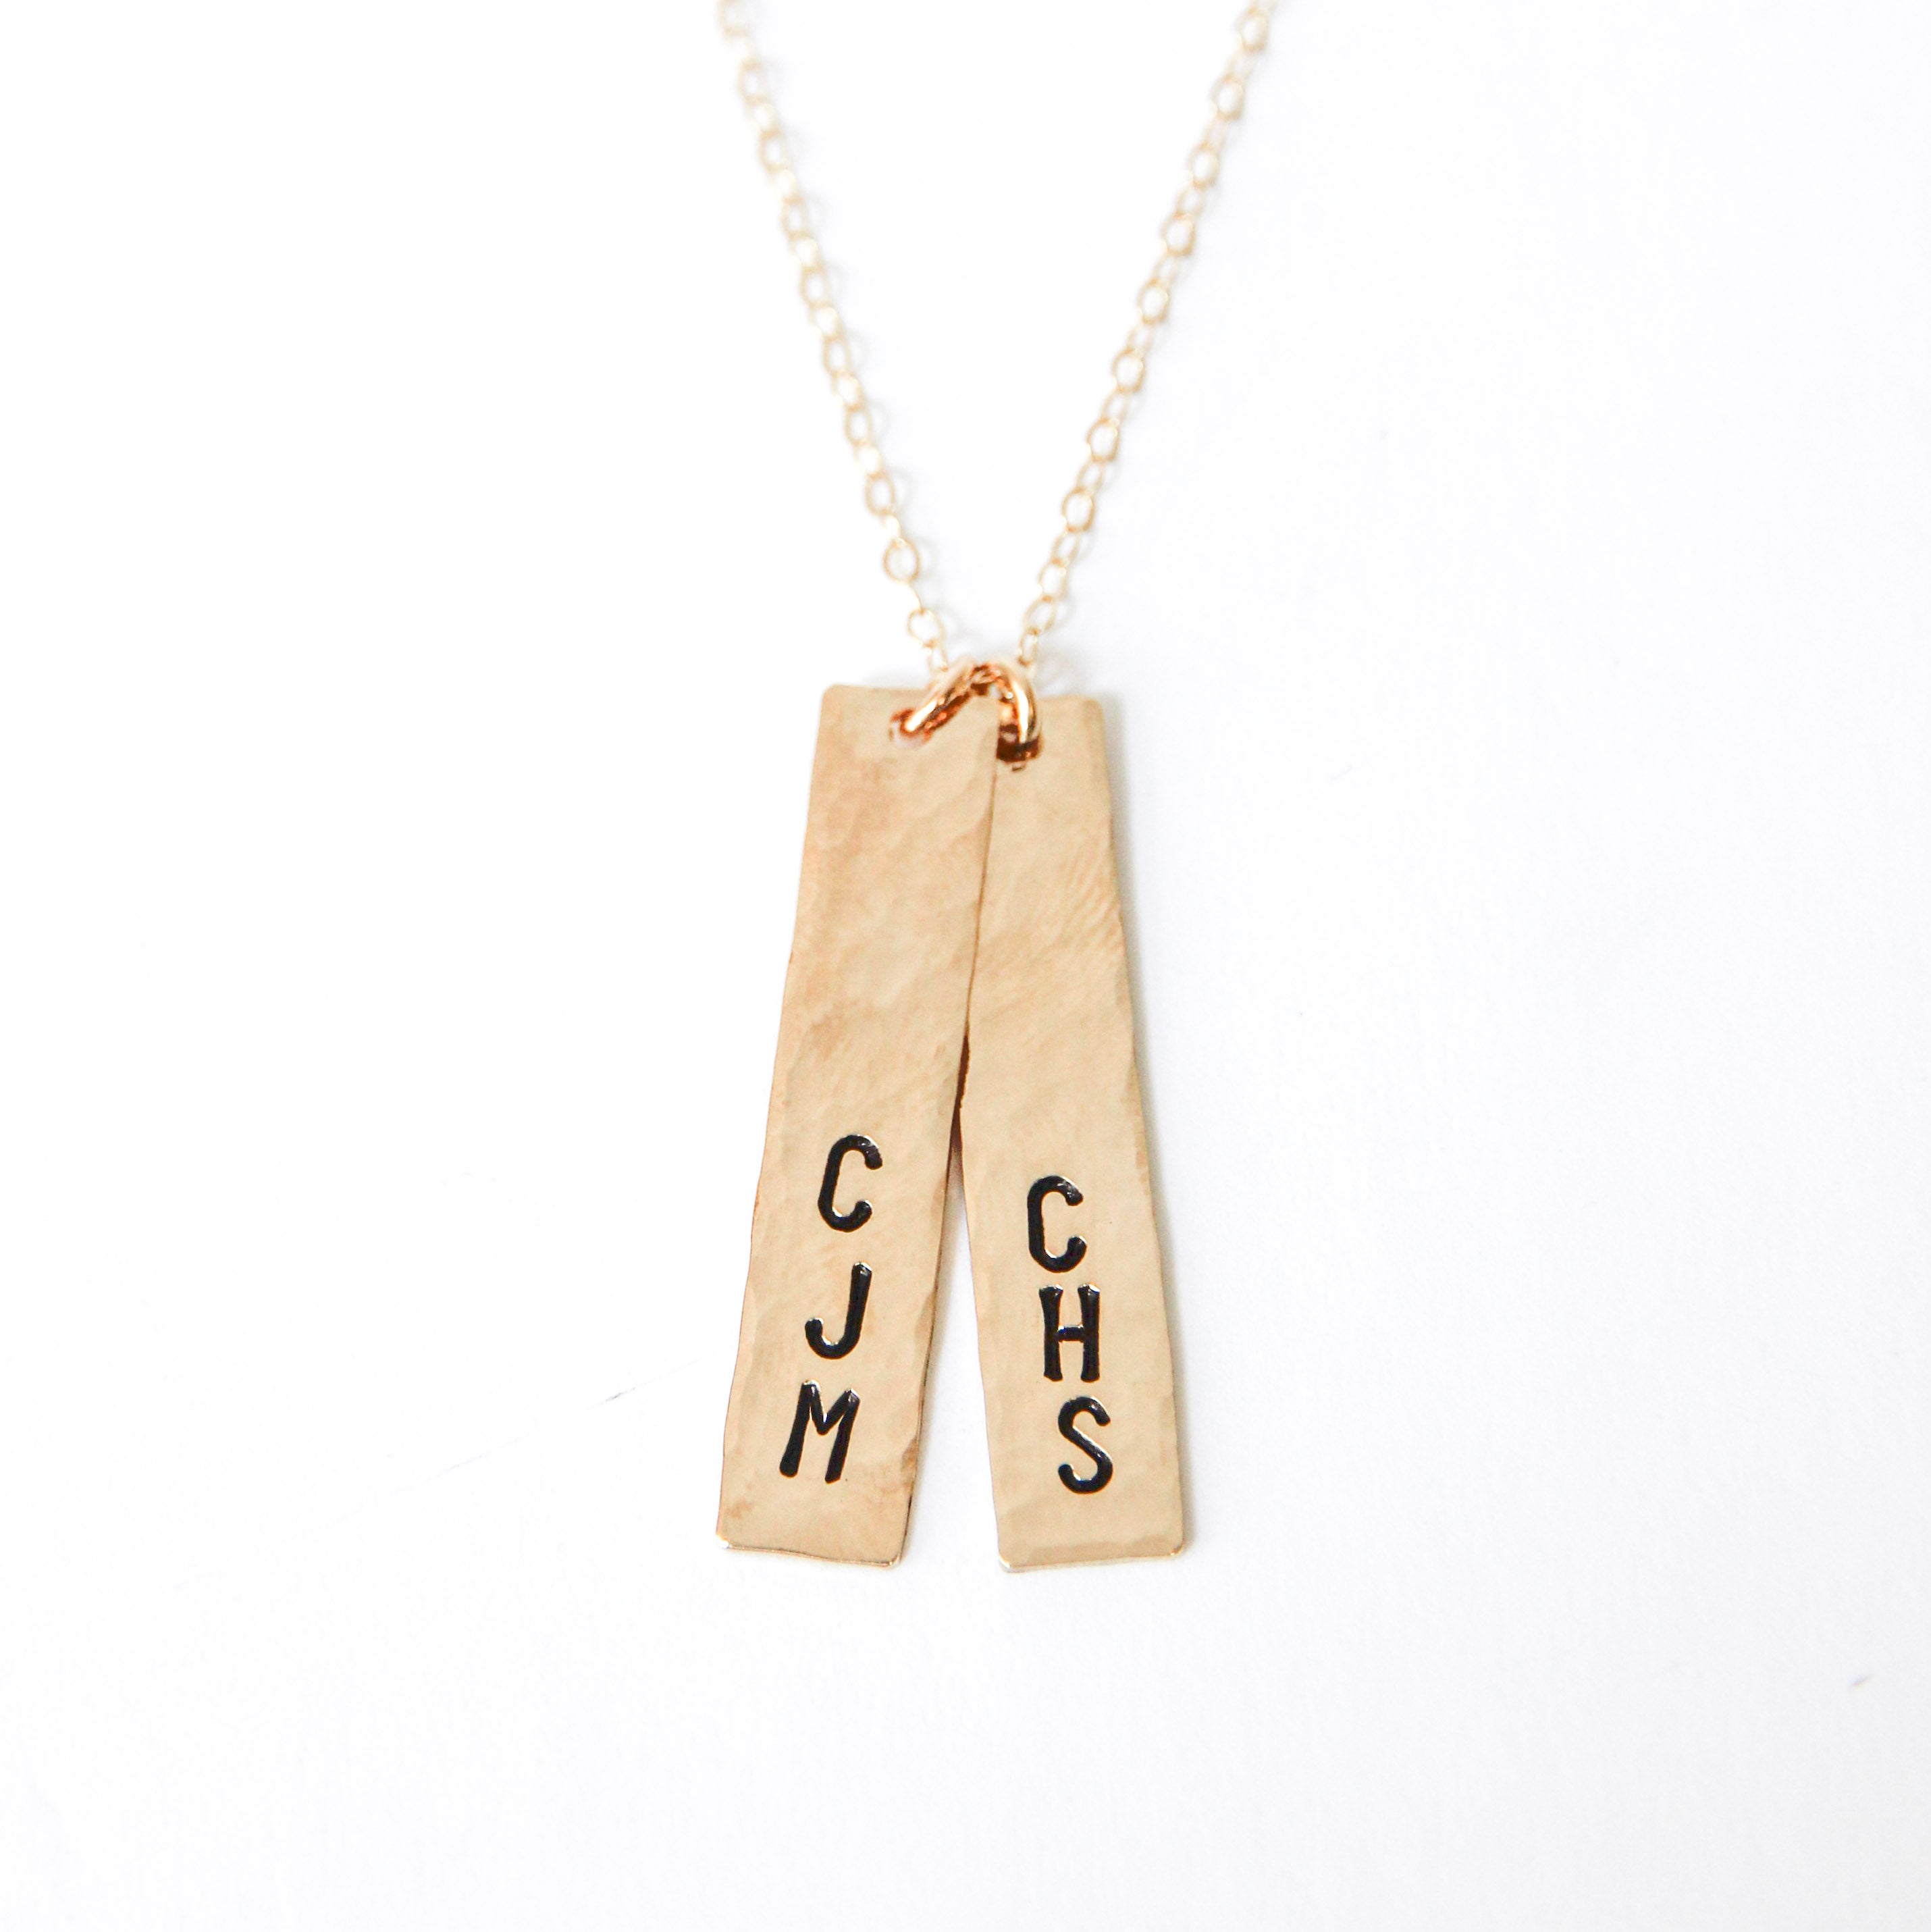 Two vertical gold bar charms with three letter stamped on both of them attached to a gold chain